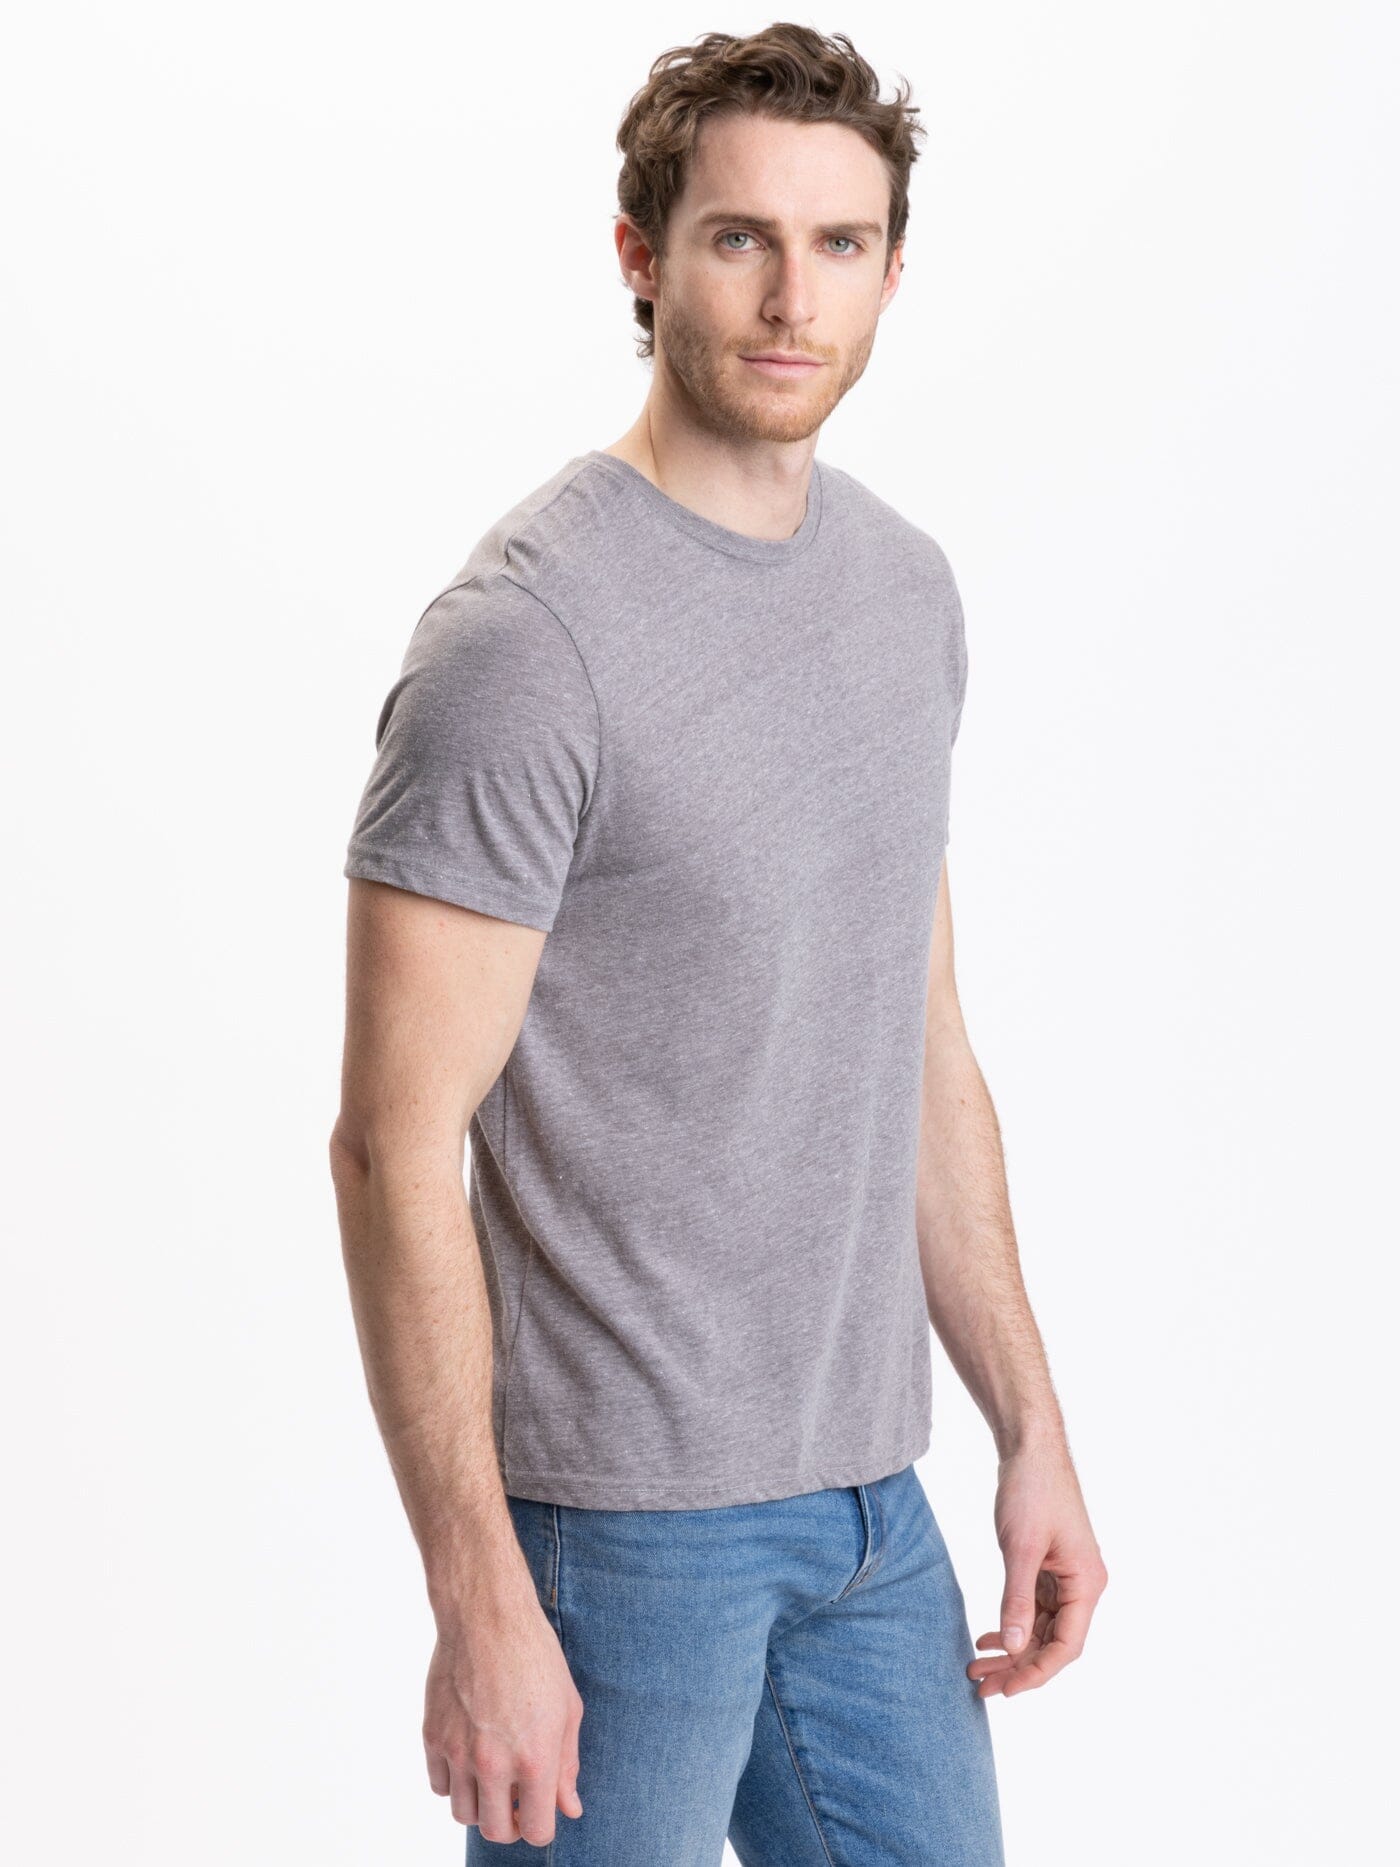 Triblend Crew Thought in Heather – Threads Tee Grey 4 Neck